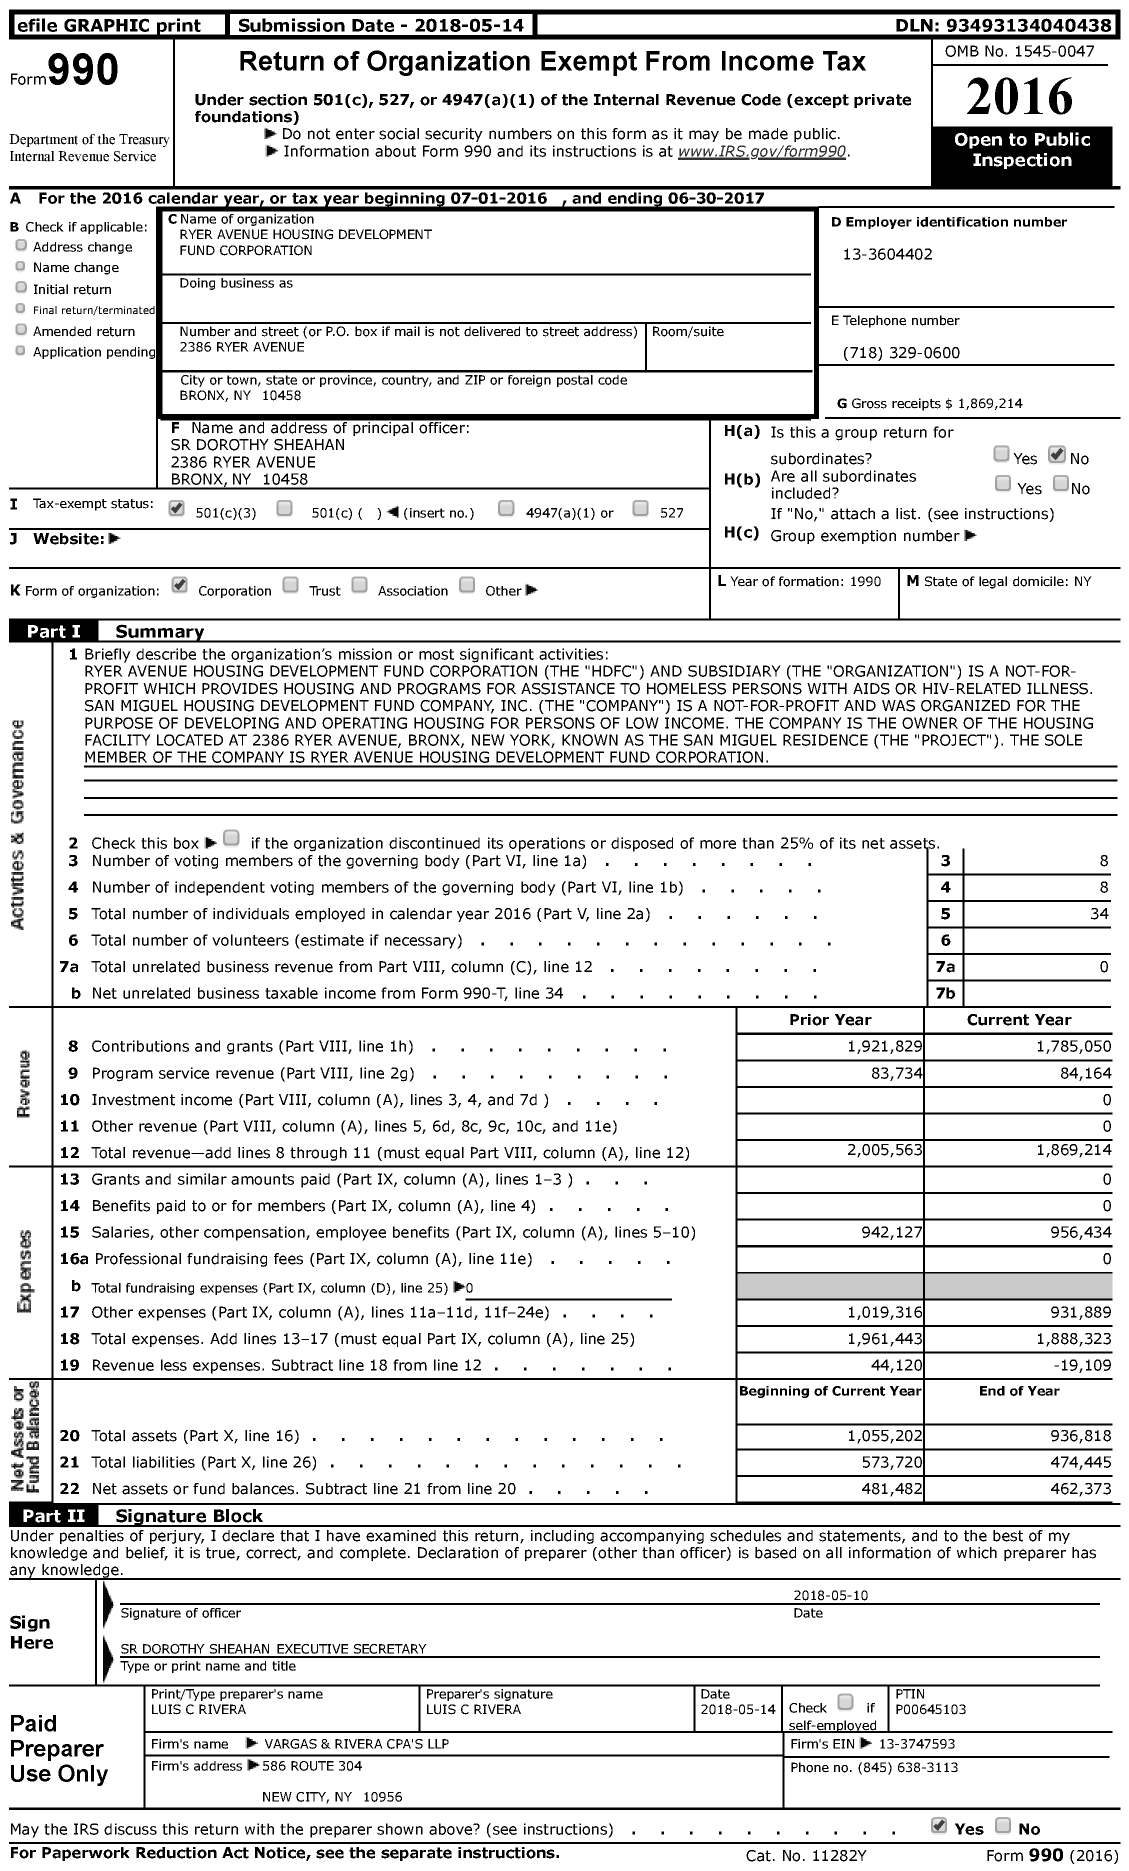 Image of first page of 2016 Form 990 for Ryer Avenue Housing Development Fund Corporation